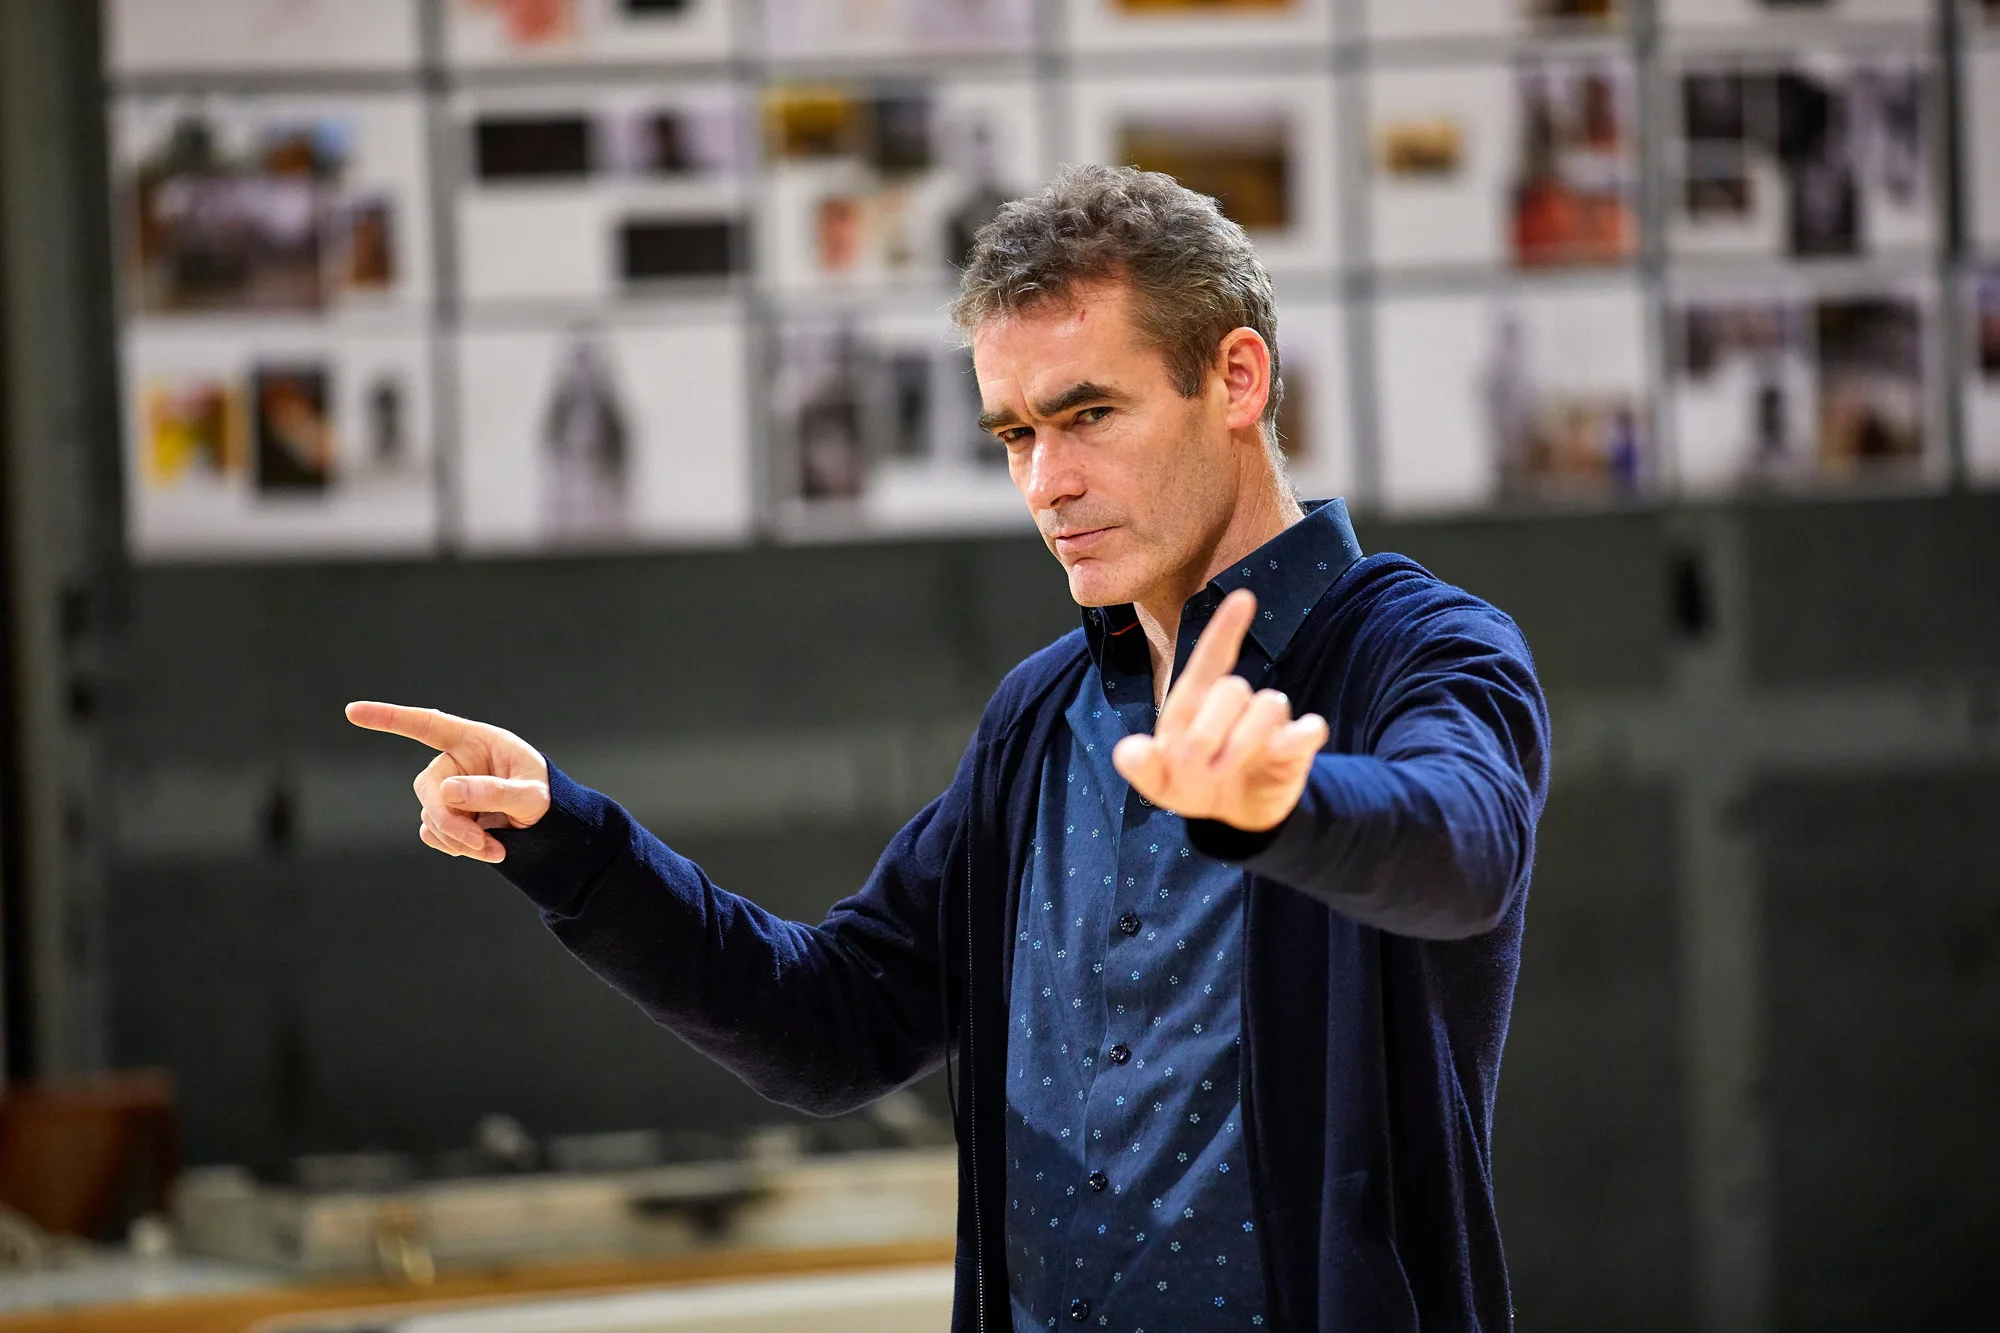 YOUR NEWS – Rufus Norris to Leave National Theatre